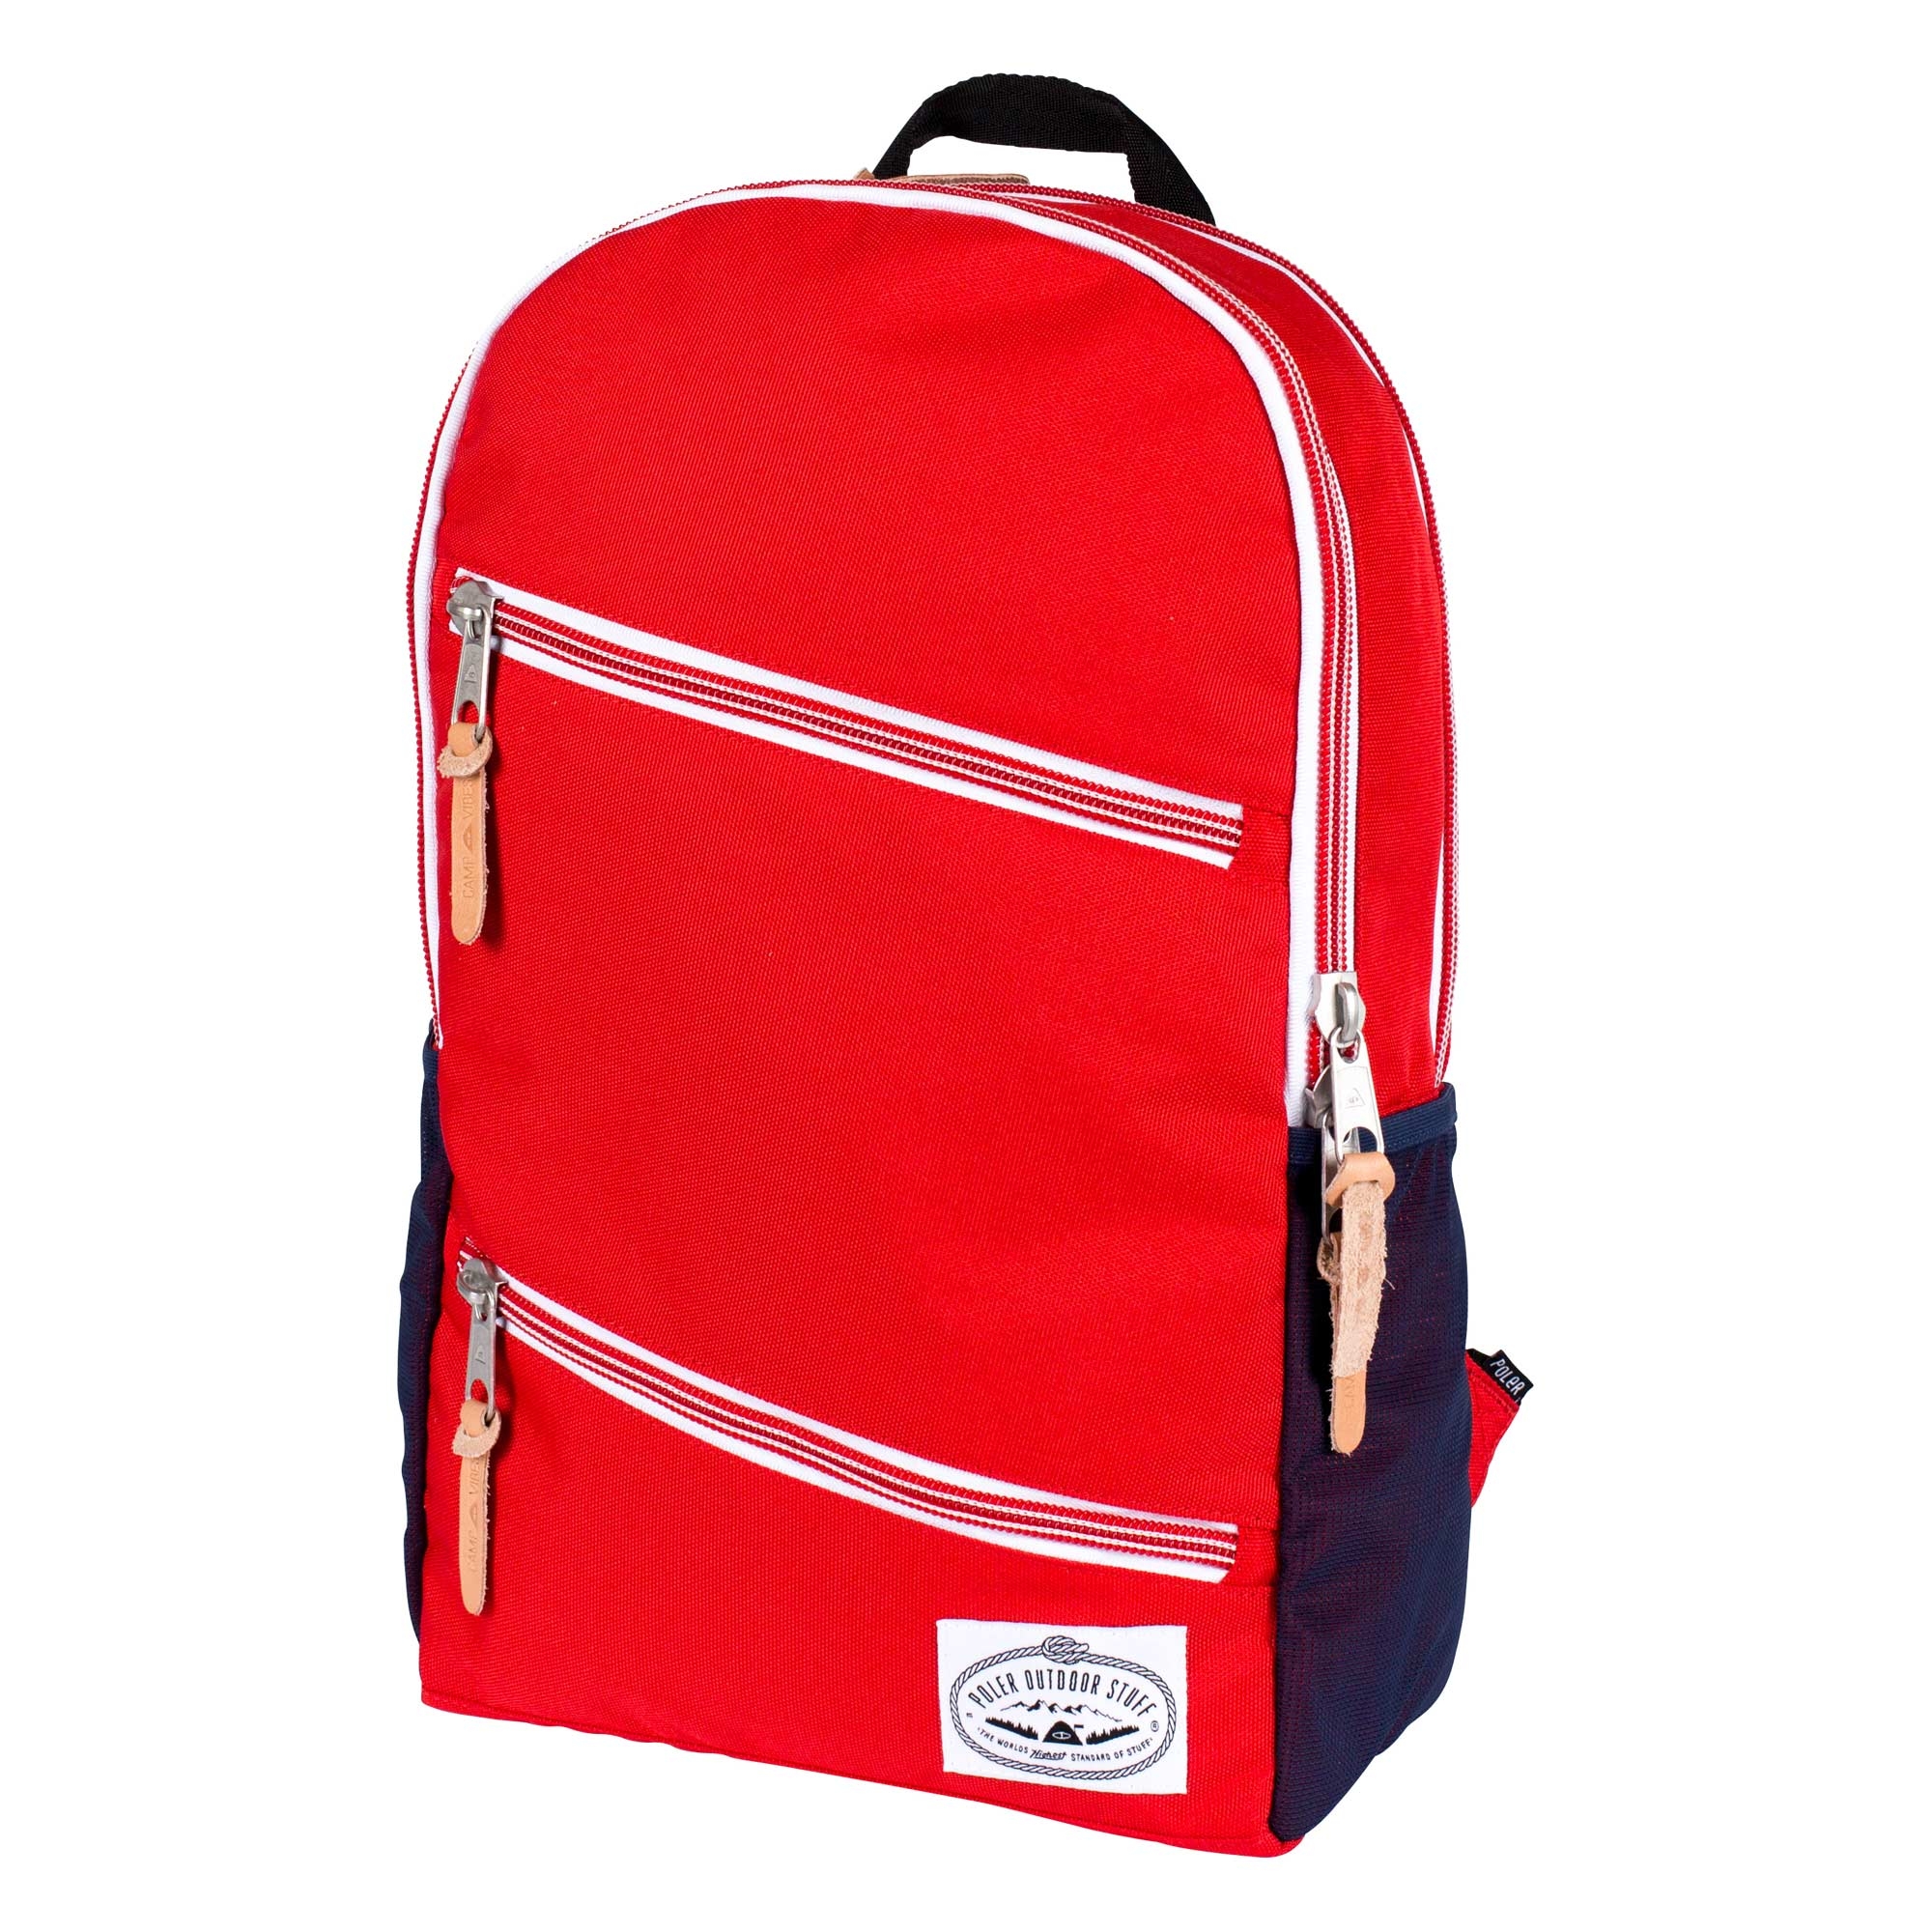 POLER Bag CLASSIC EXCURSION PACK, bright red